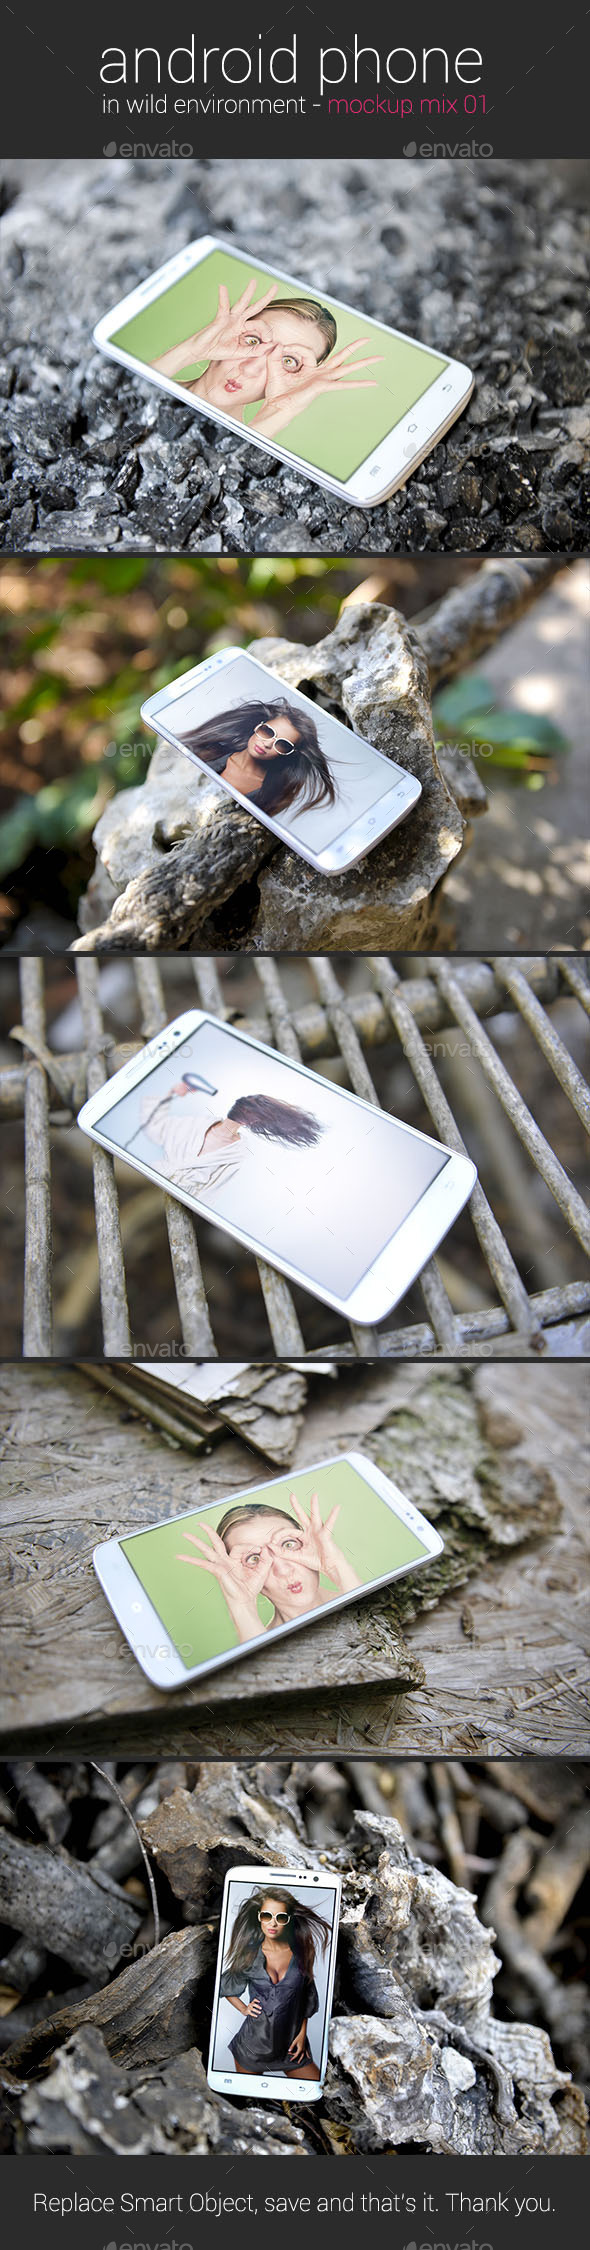 Android Phone in Wild Environment - Mockup